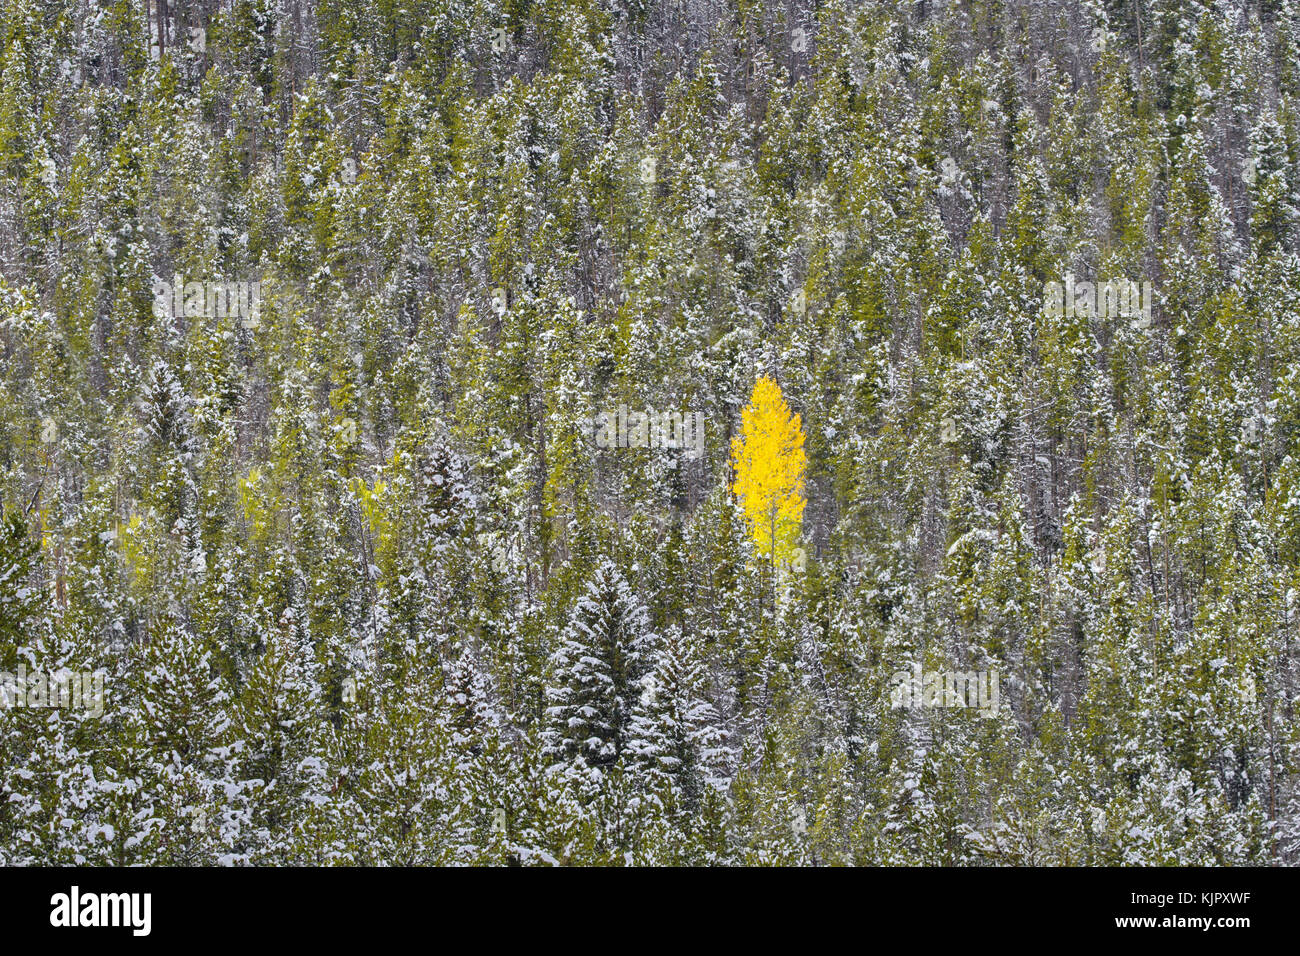 Eccentric, golden yellow tree stands out in the crowd in early autumn color at Rocky Mountain National Park in American West region.  Horizontal, back Stock Photo